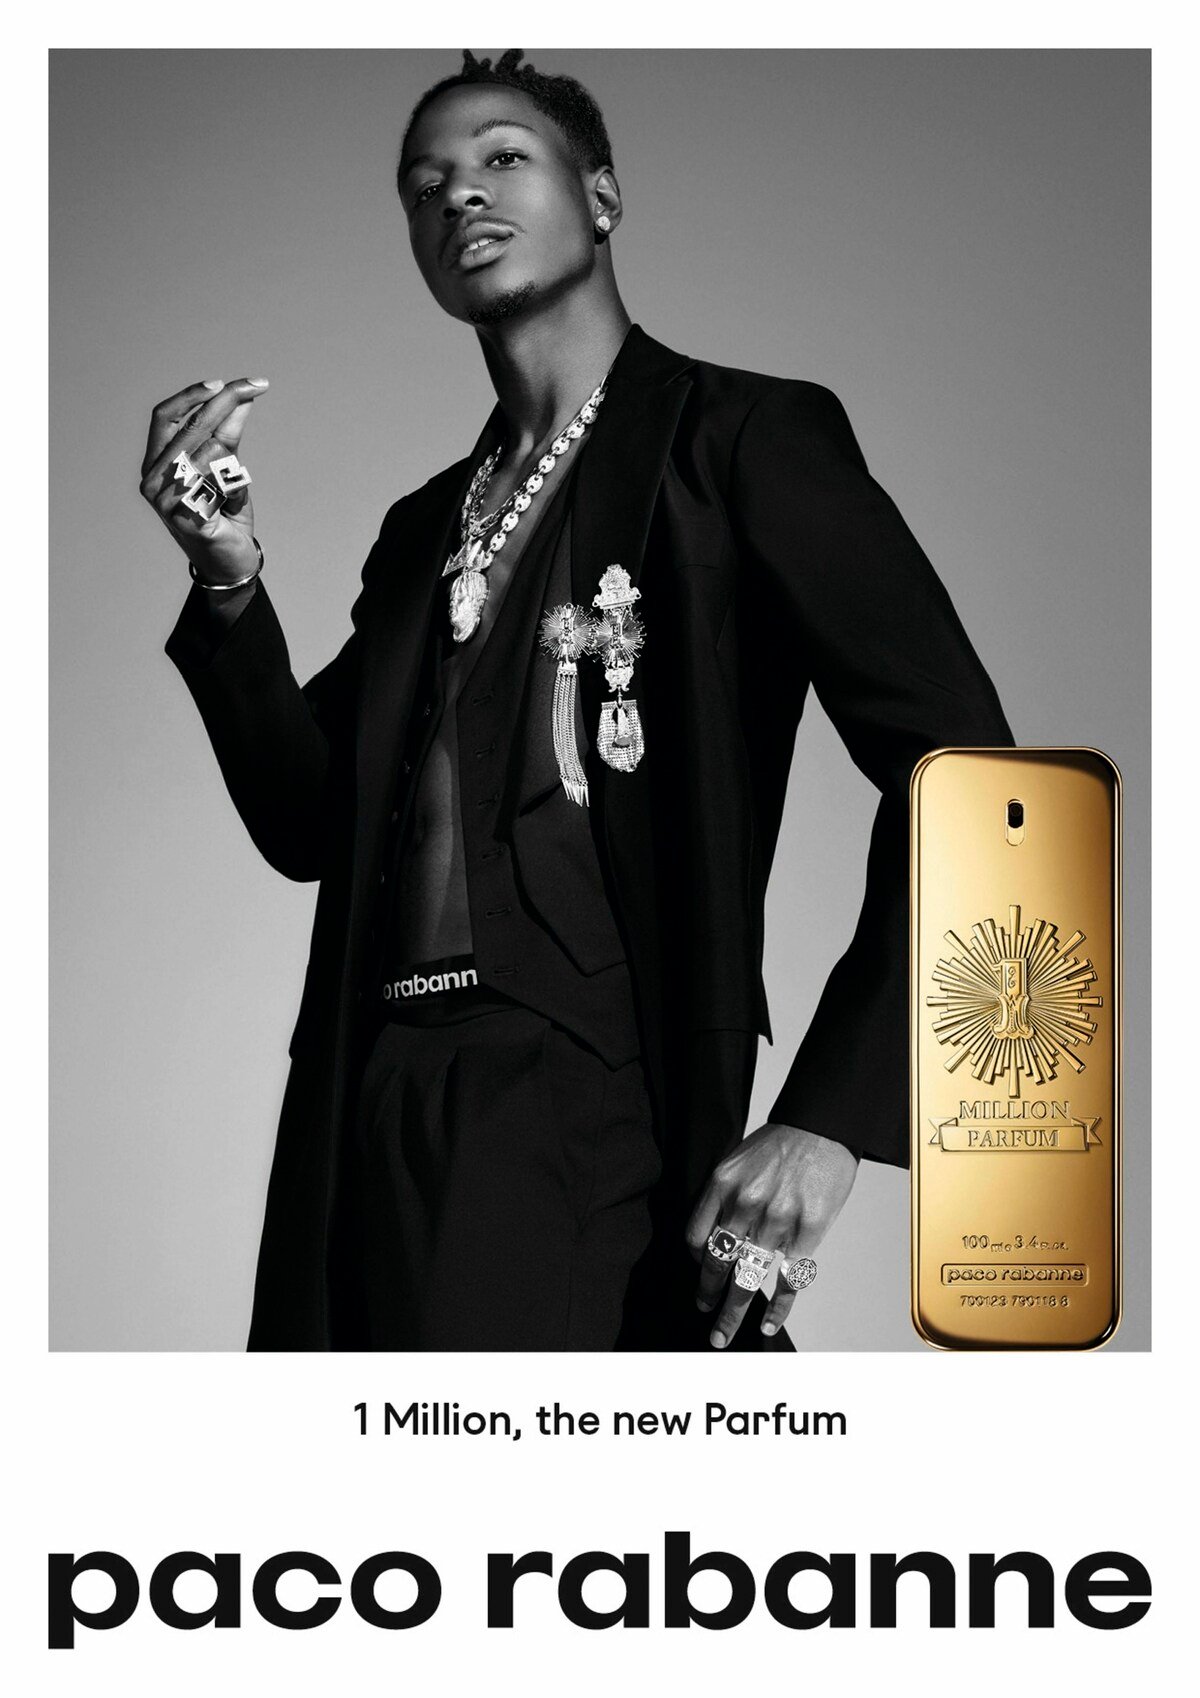 1 Million Parfum by Paco Rabanne » Reviews & Perfume Facts